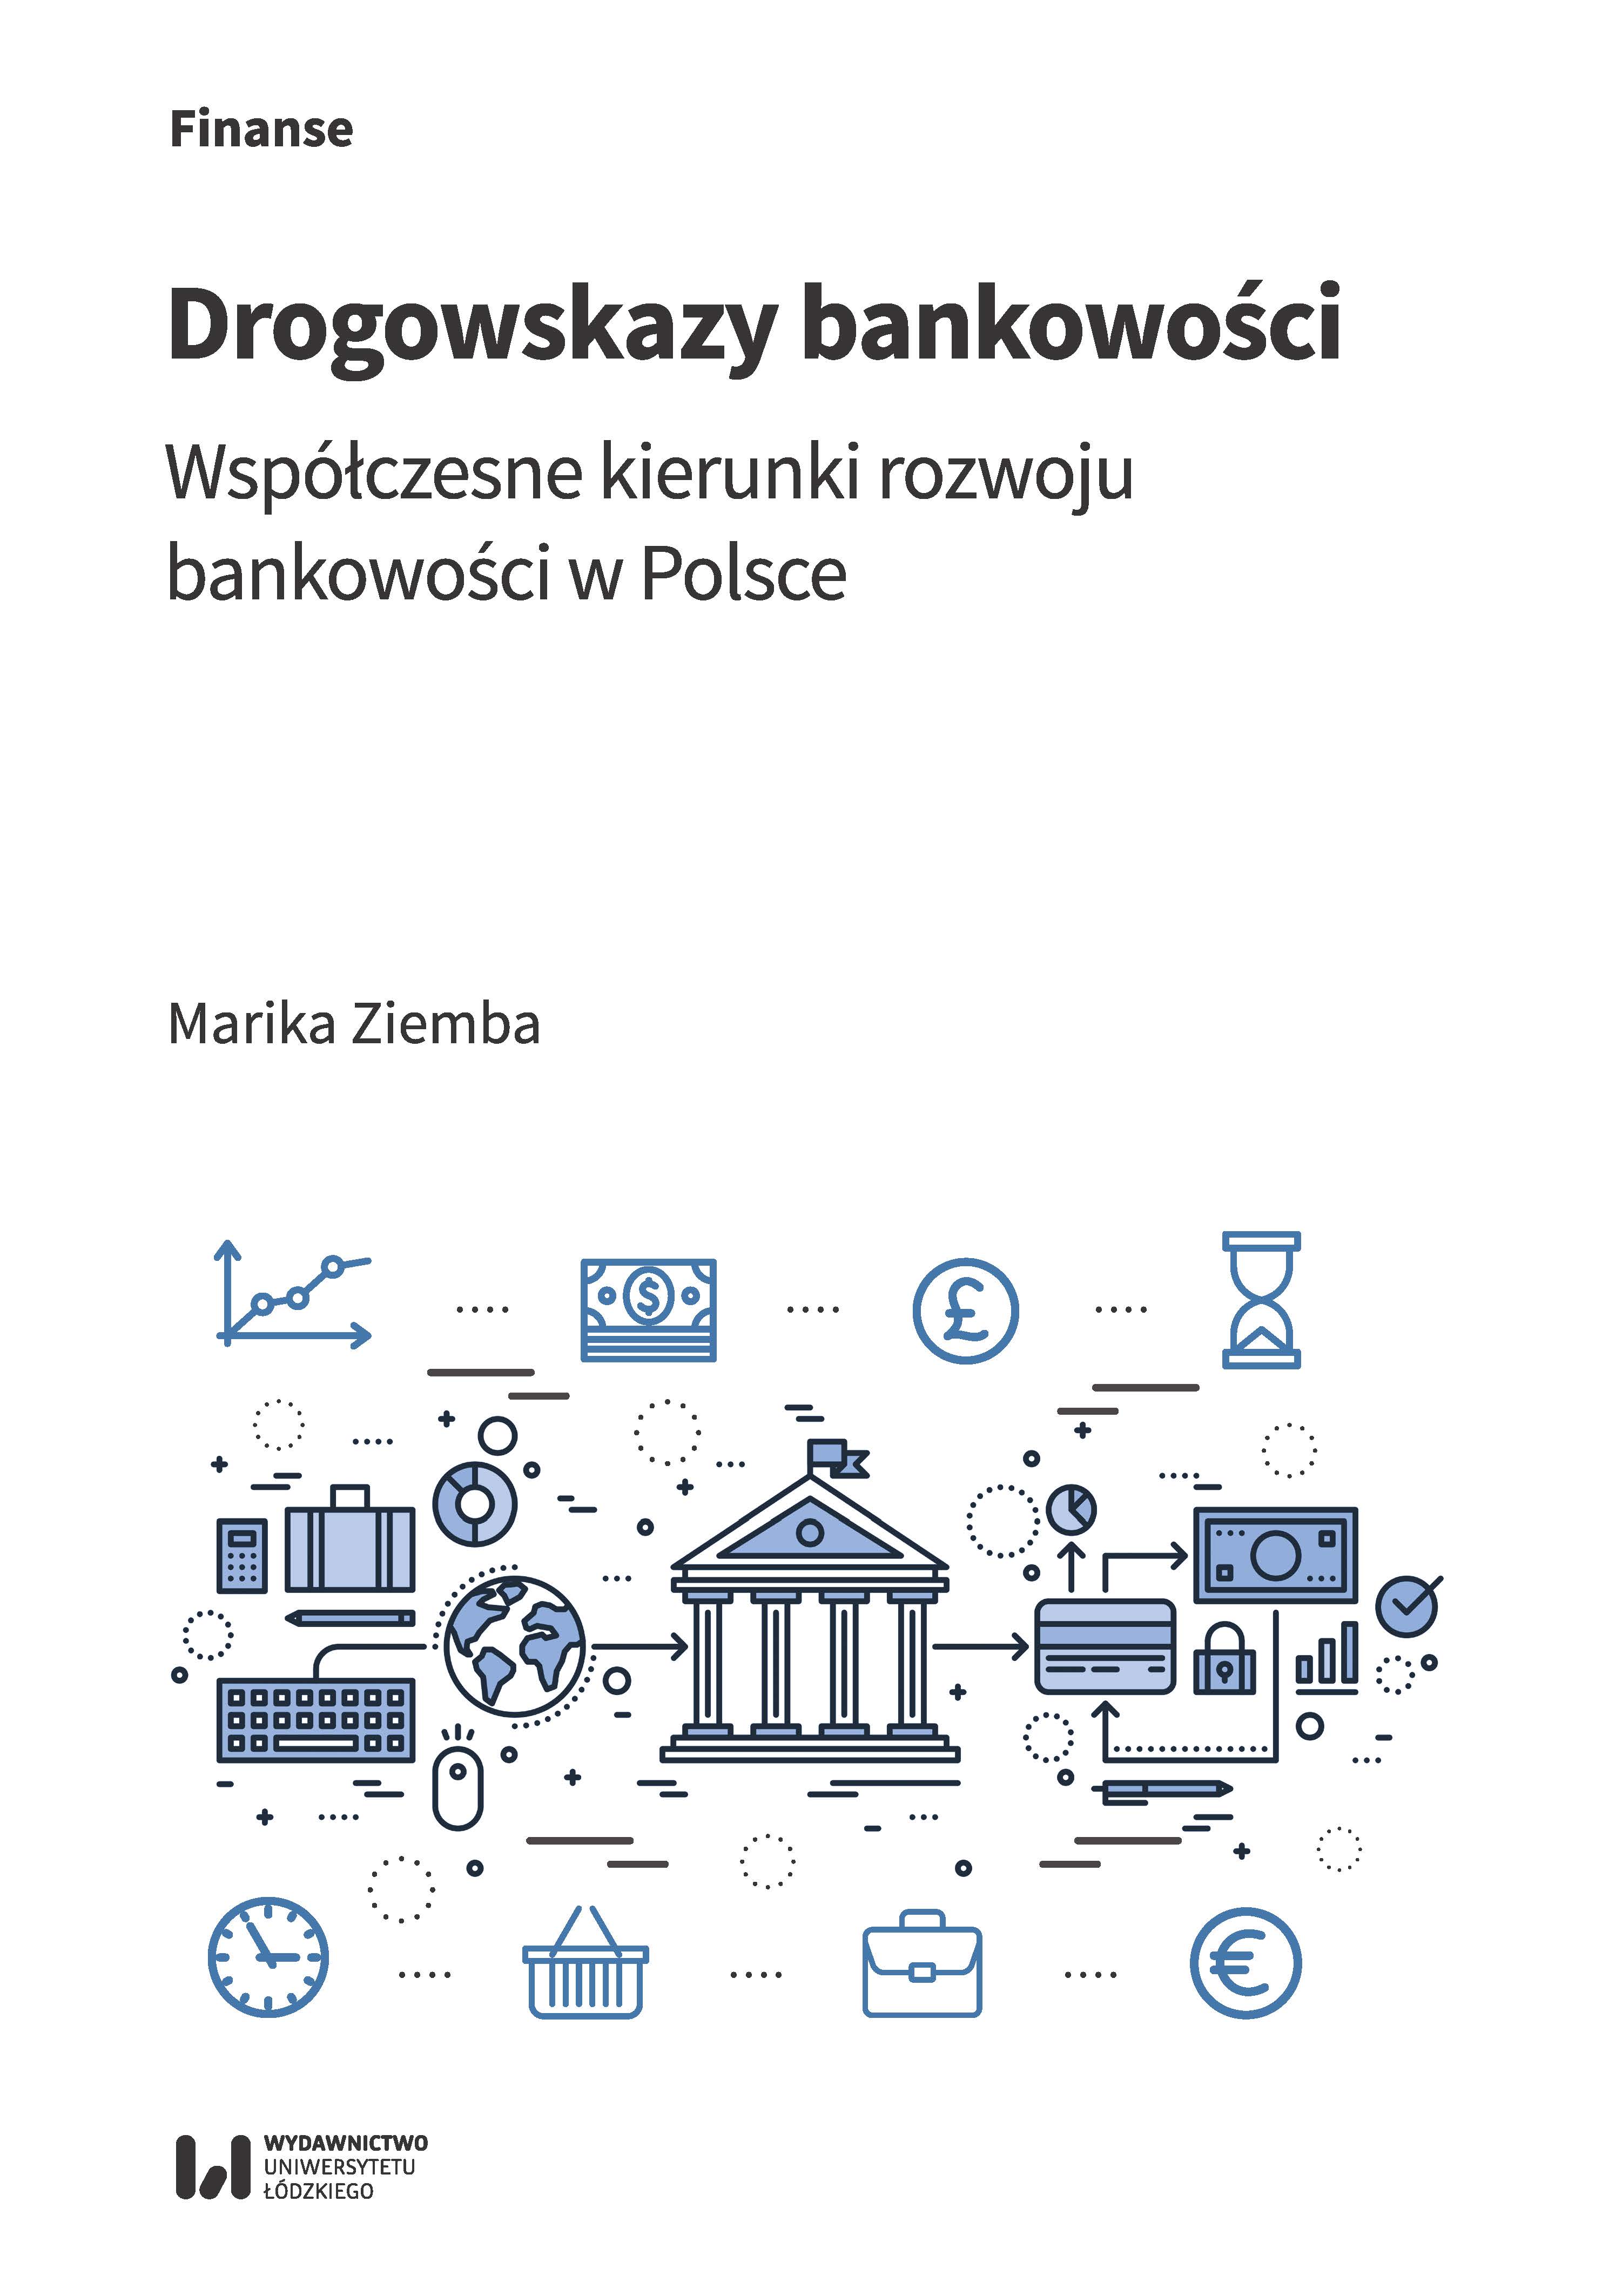 Banking signposts. Contemporary directions of development of the banking sector in Poland